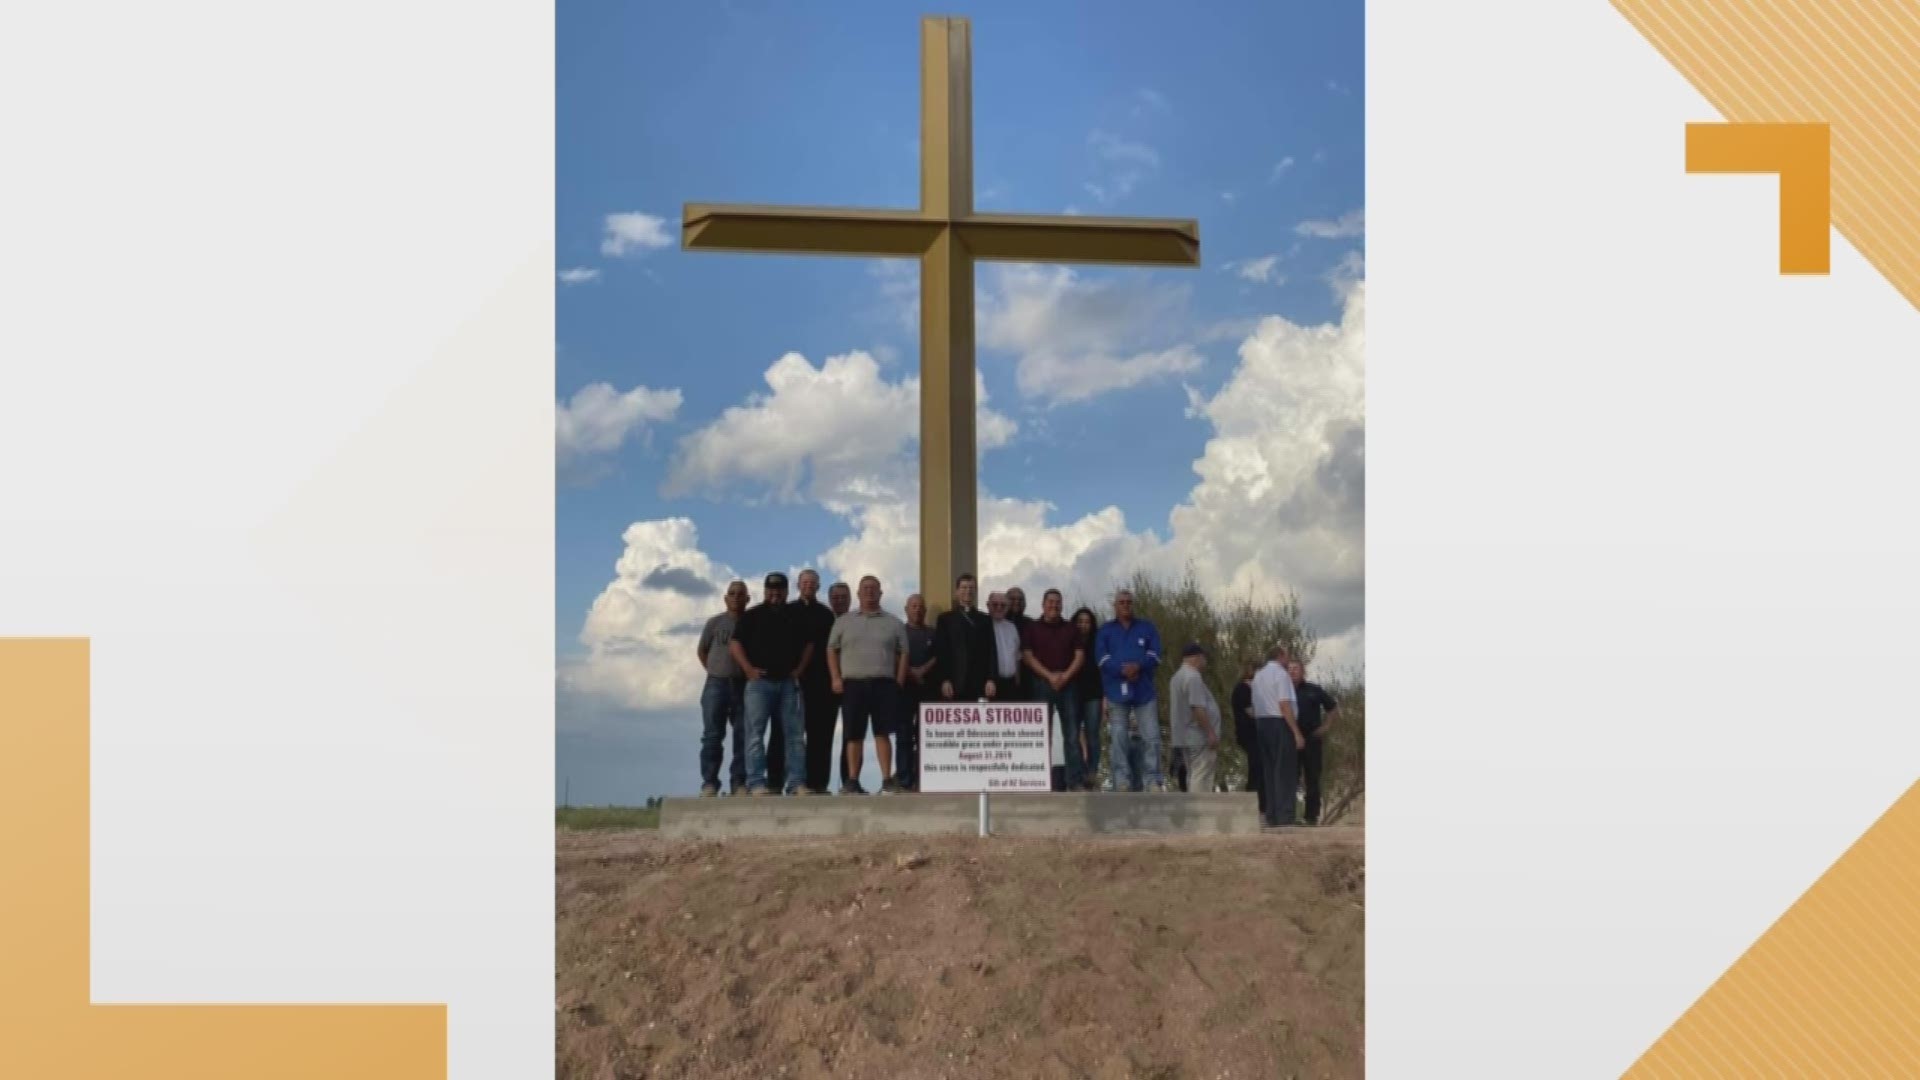 The new cross was dedicated to the mass shooting victims on October 2.